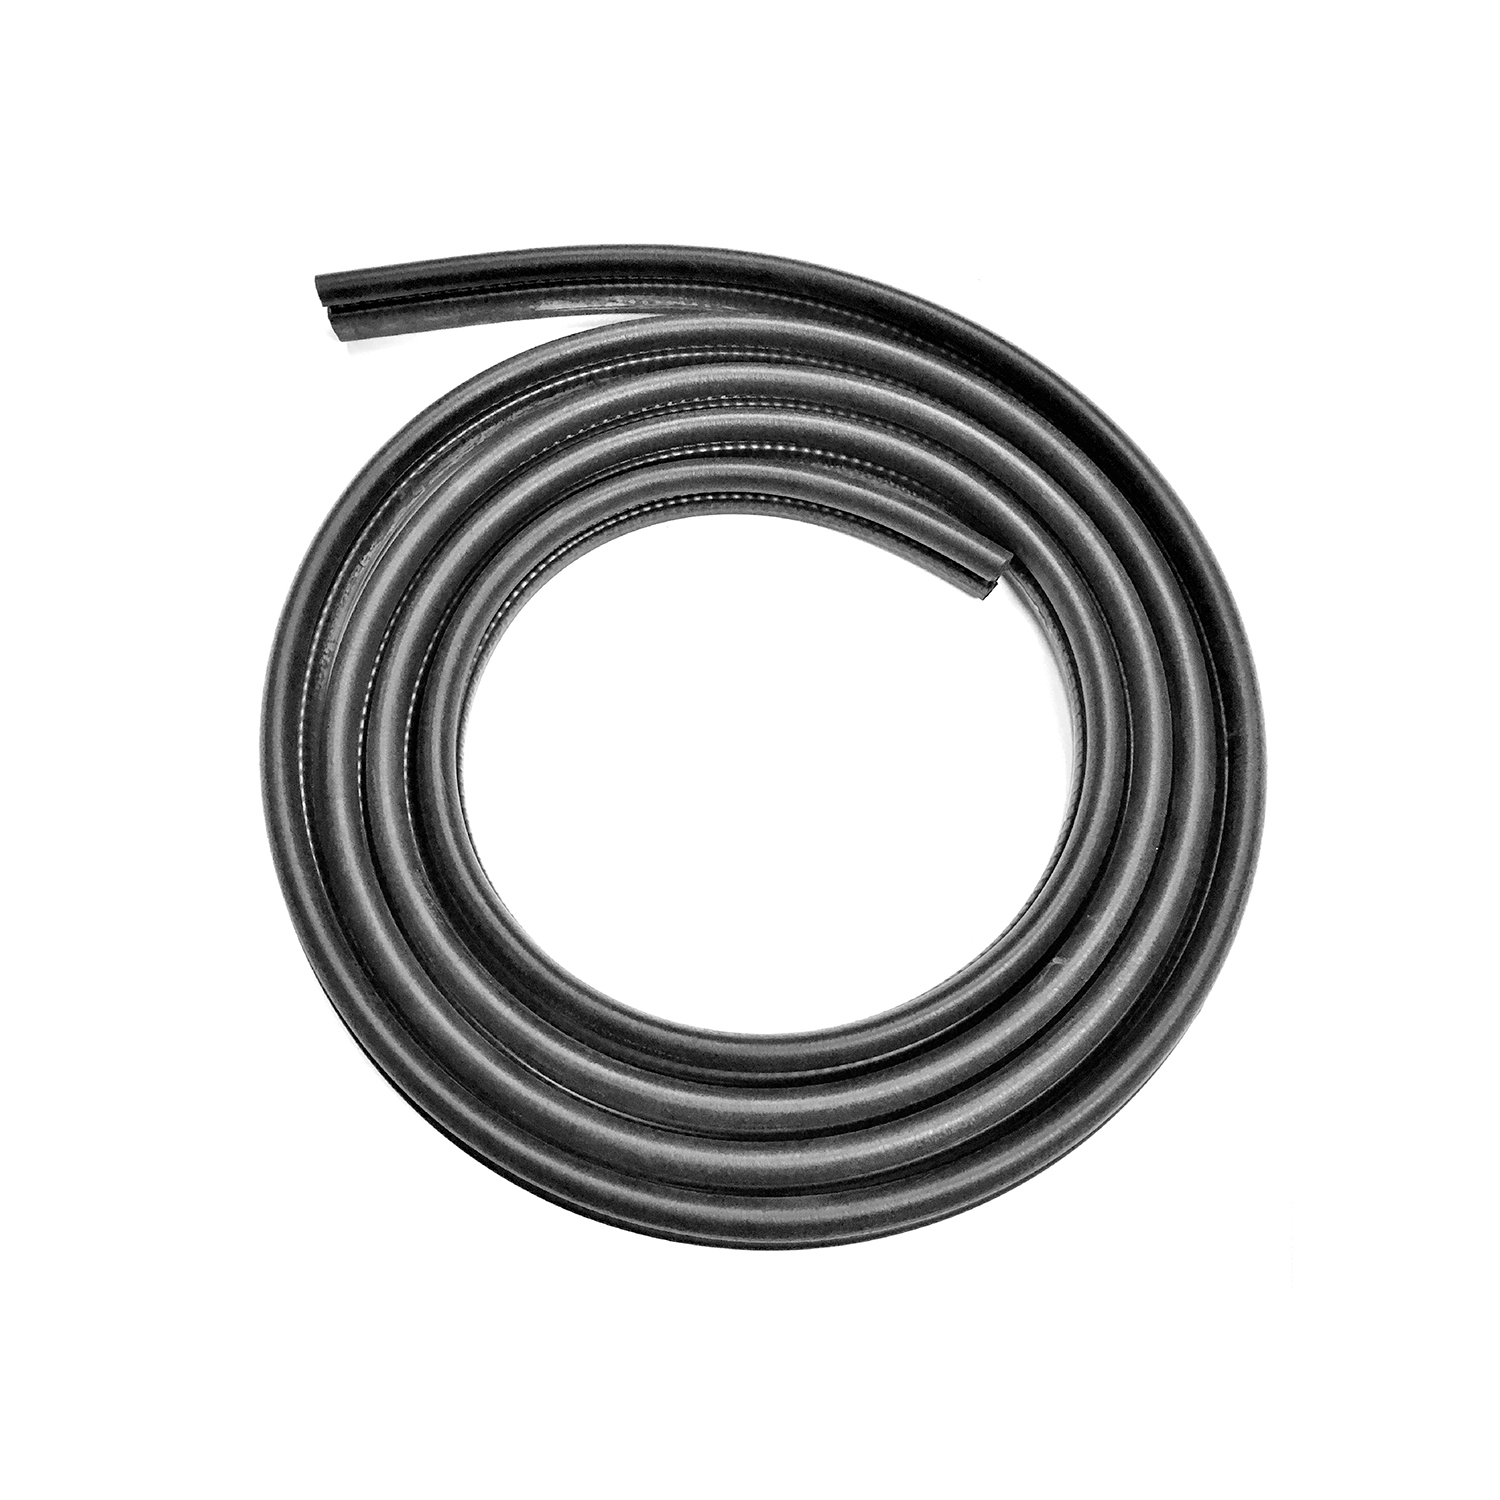 2013 Ford E-450 Super Duty Door seal, '04-'14 Ford E-Series full size van models, fits front left or right-LM 110-VH